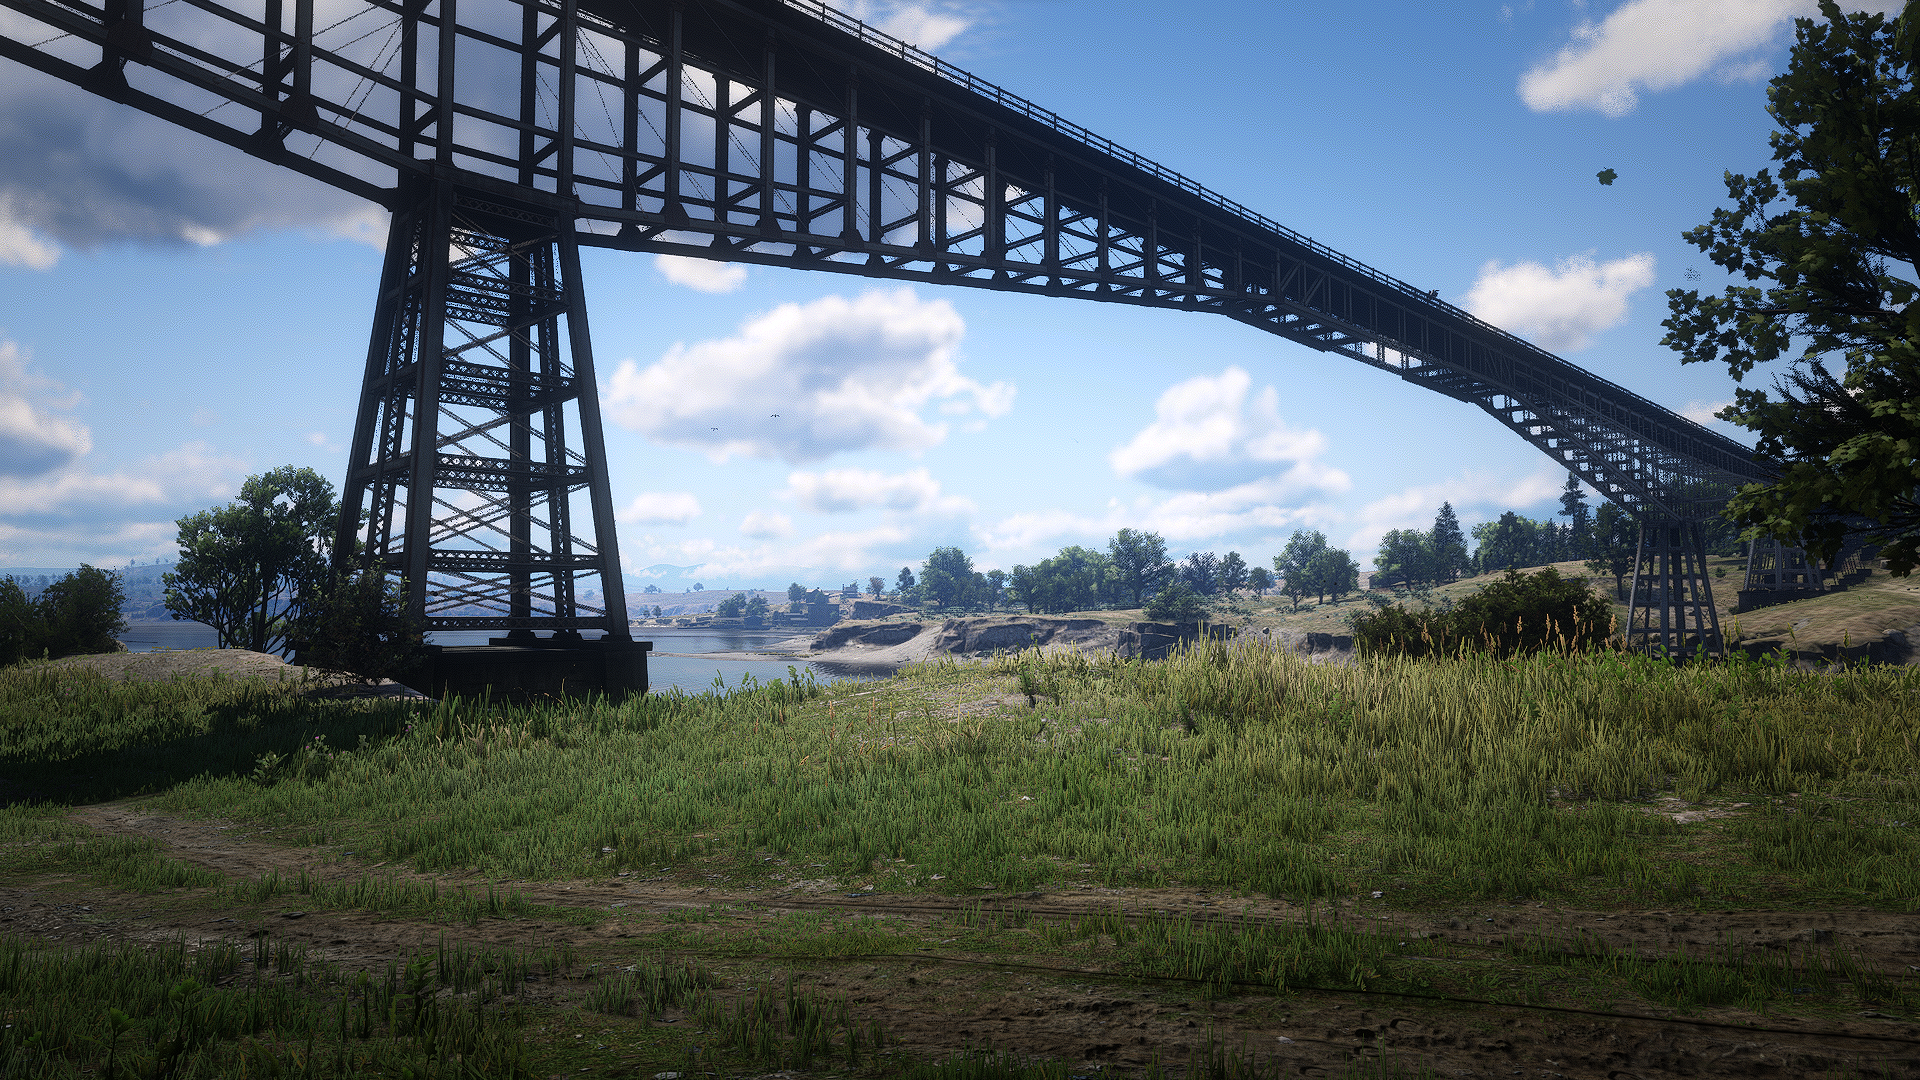 General 1920x1080 Red Dead Redemption 2 Red Dead Redemption railway beach clouds fictional PC gaming screen shot video games bridge construction